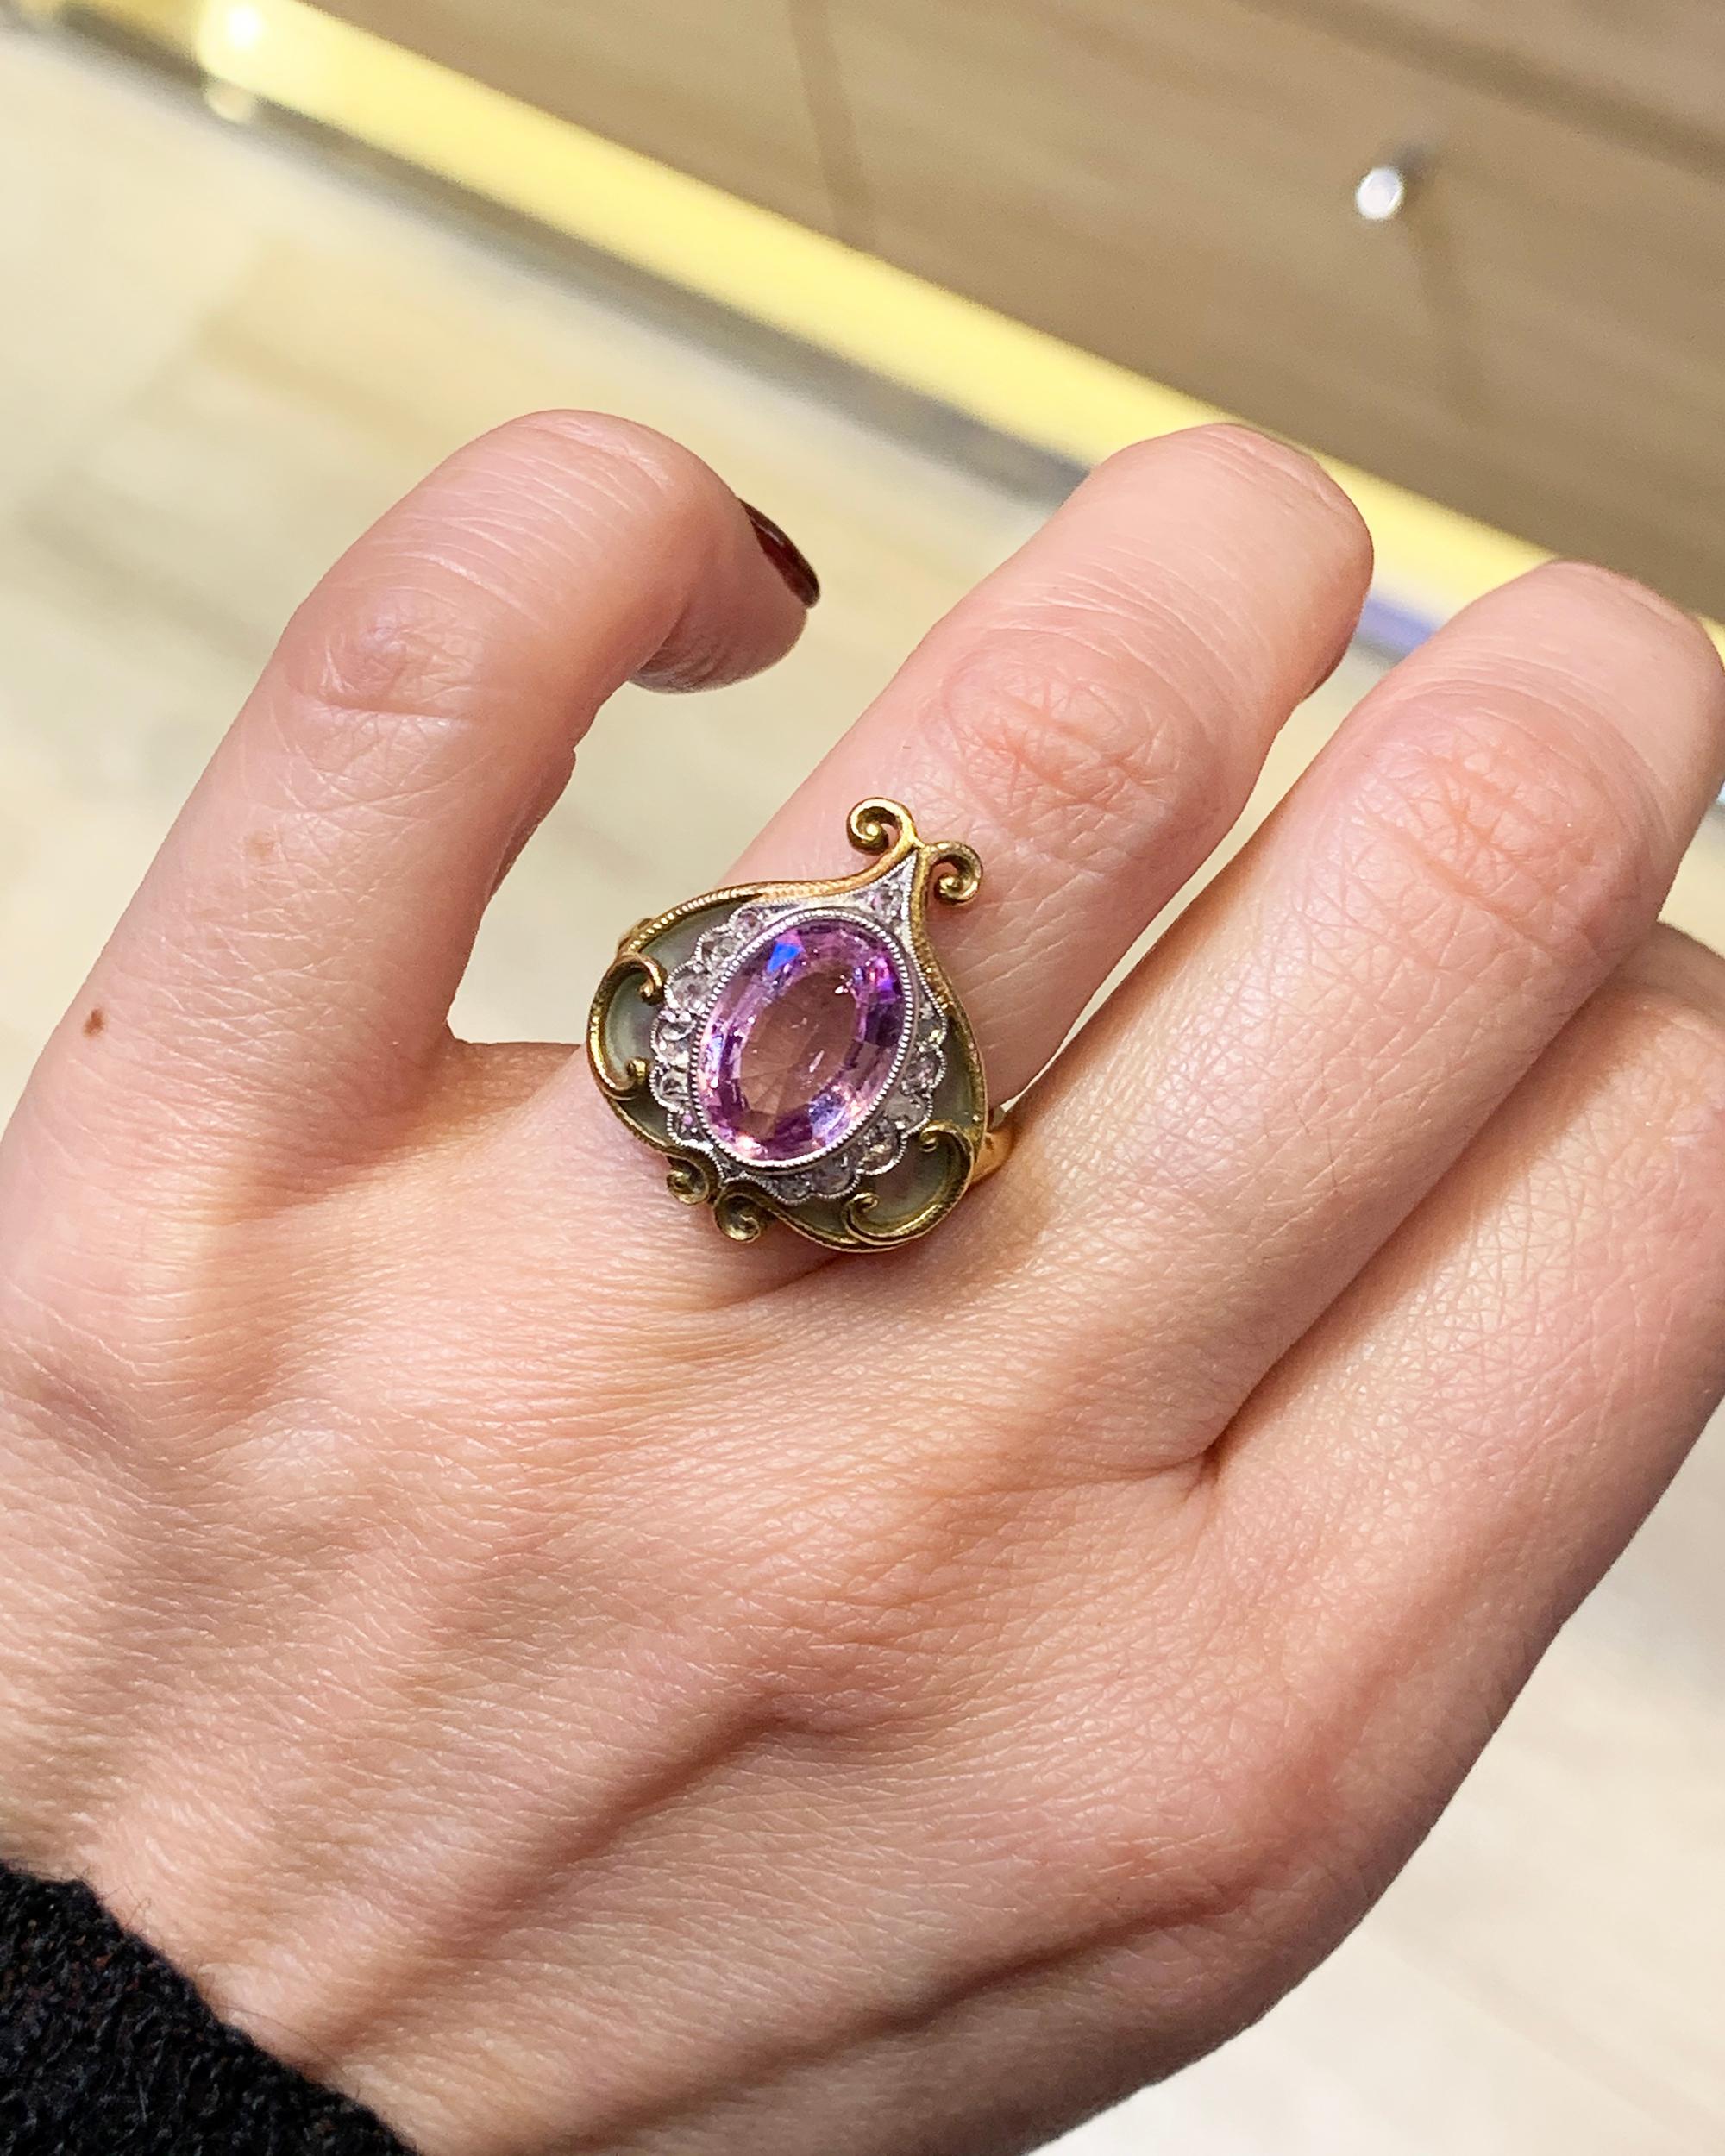 A unique Art Nouveau cocktail ring depicting an oval pink spinel surrounded by round diamonds.
Set in 18k yellow gold weighing 7.55 grams.
Size 5. Resizing available.
